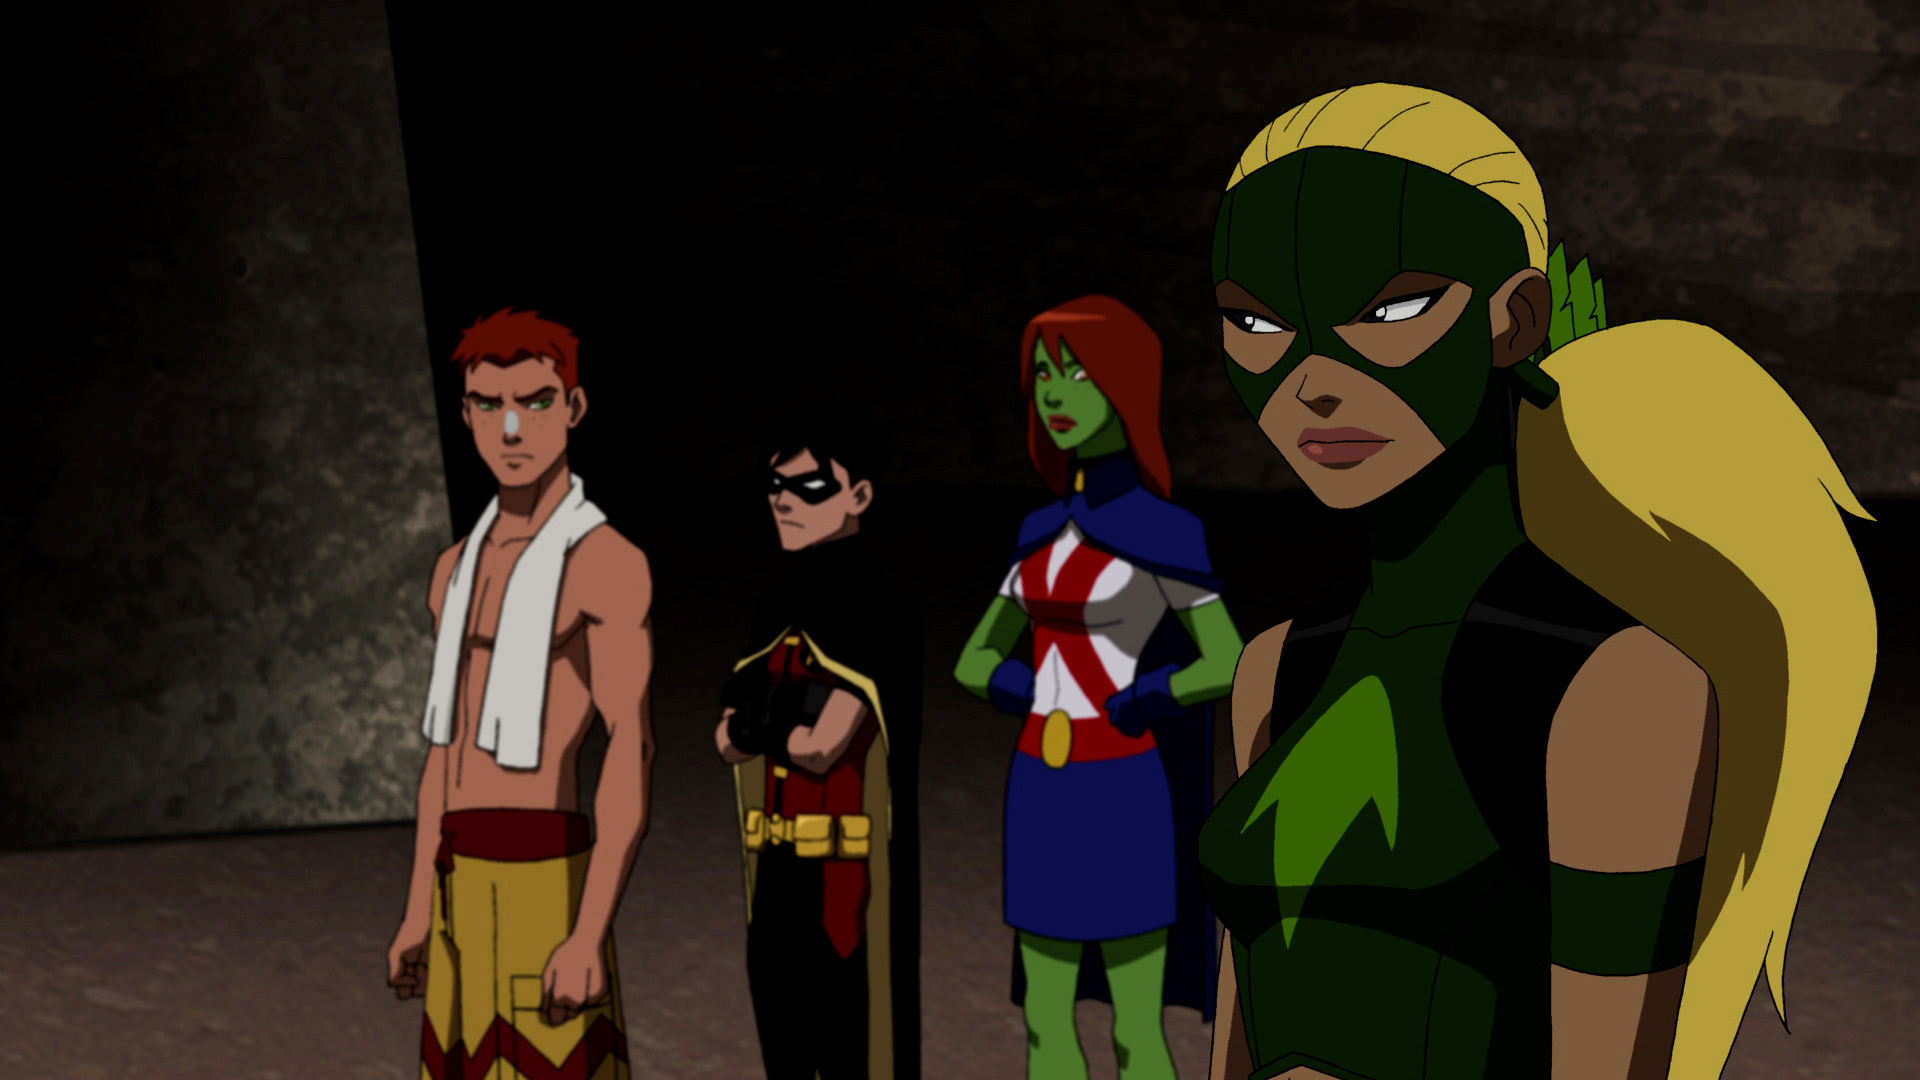 Young Justice - HD Wallpaper 